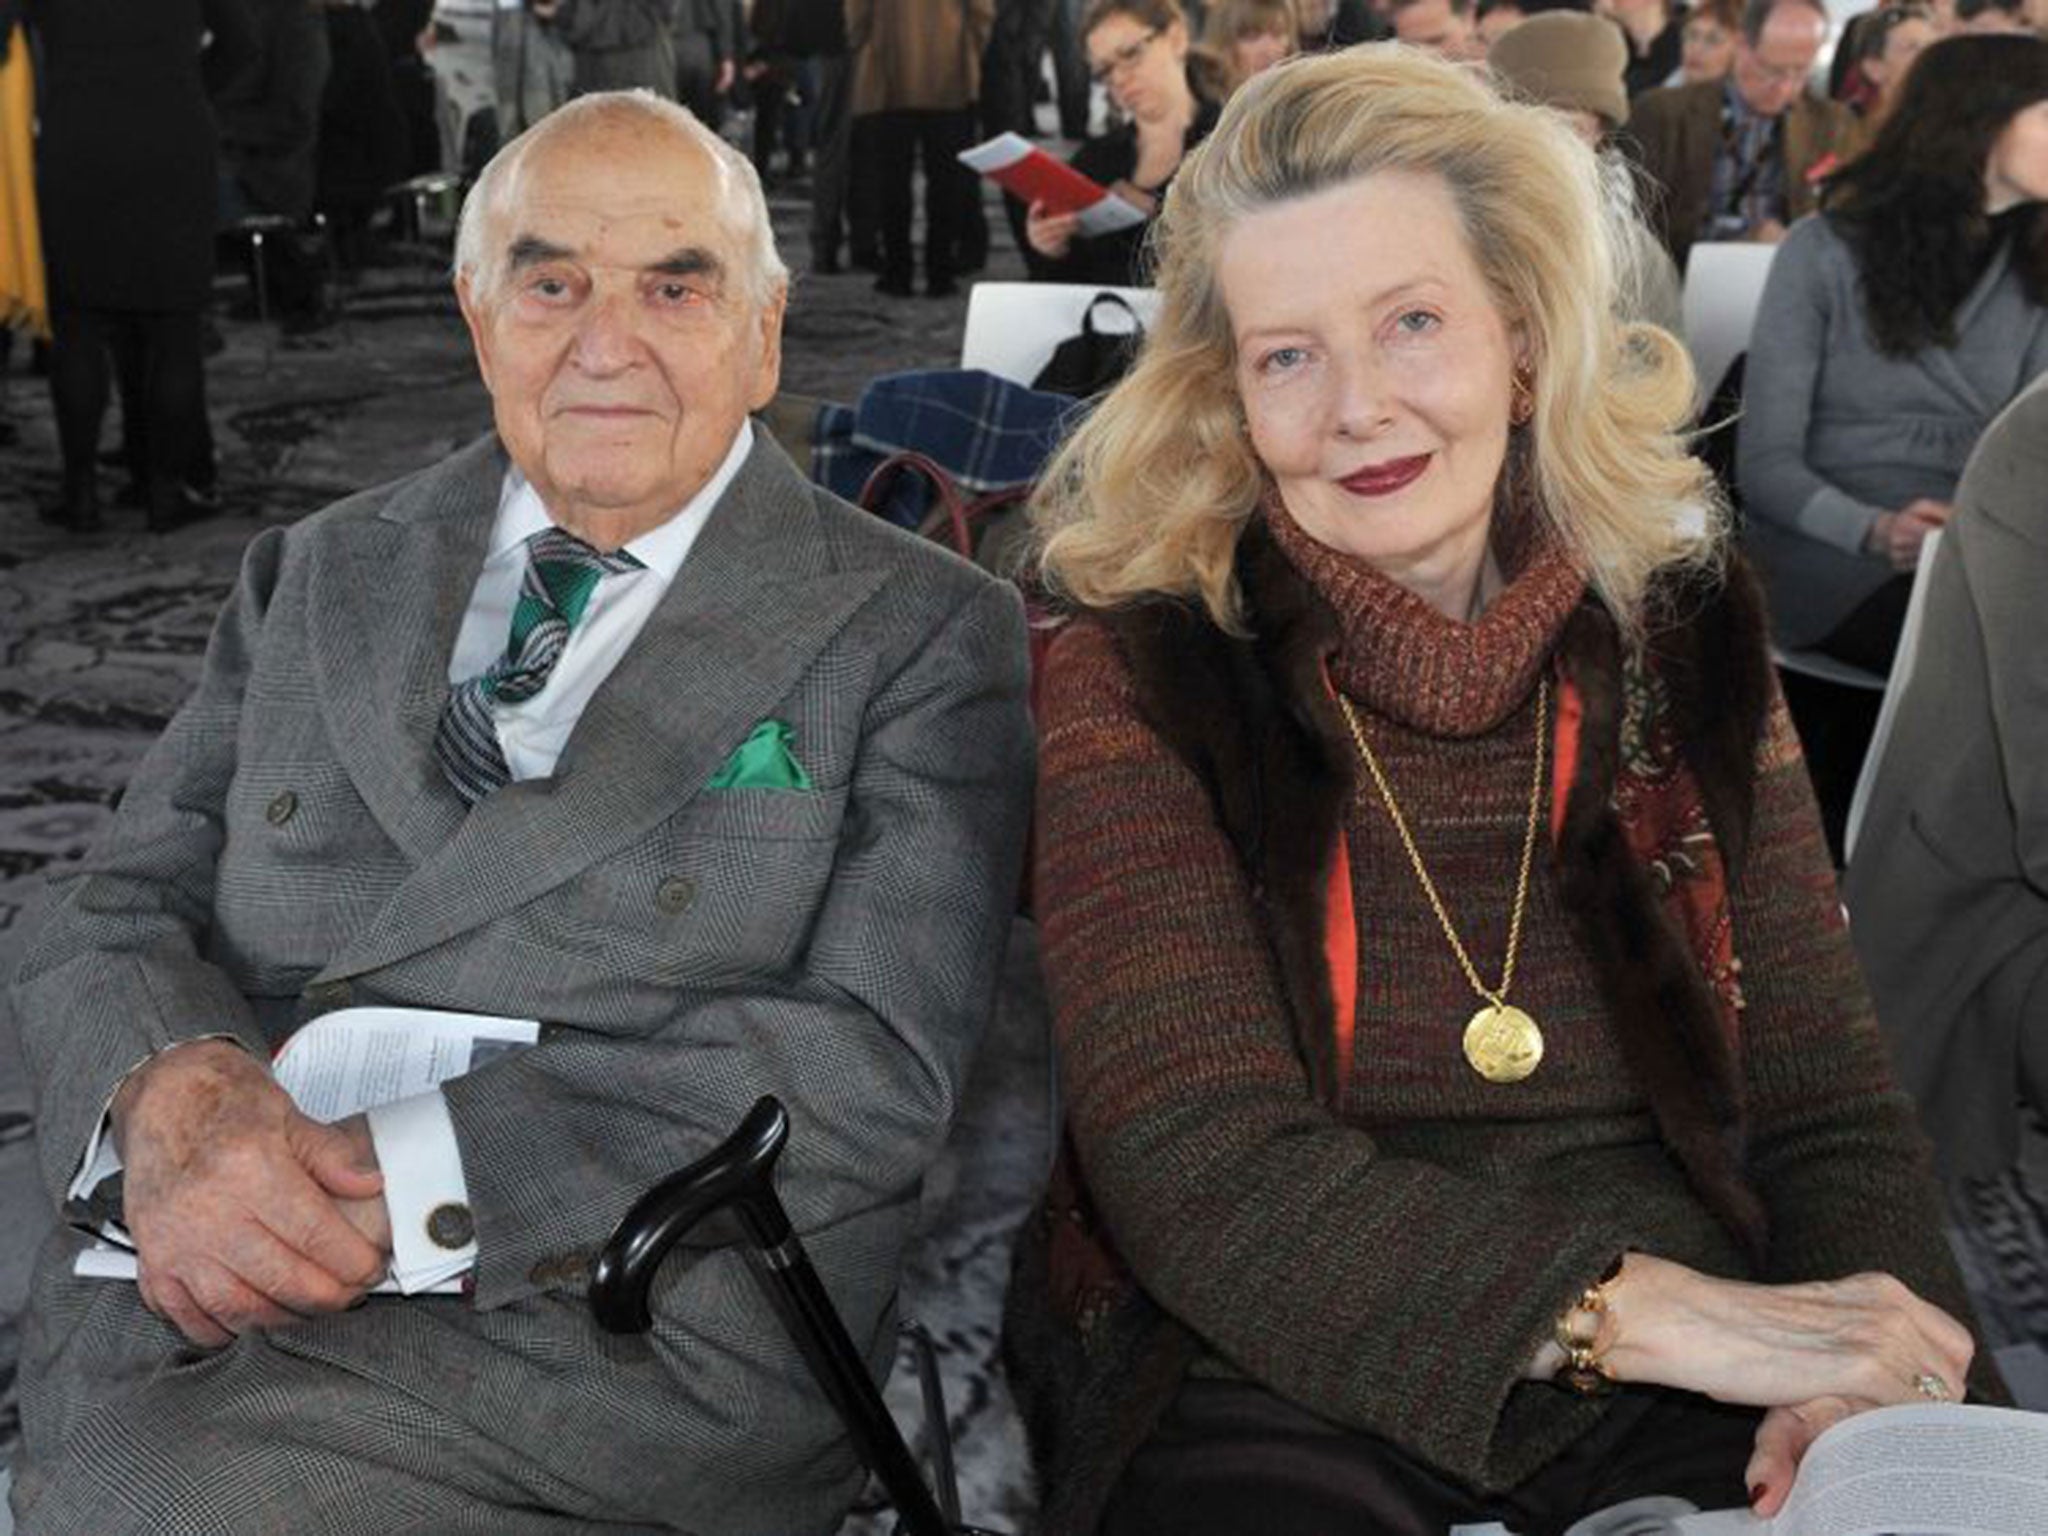 The obituaries of Lord Weidenfeld, pictured with his wife Annabelle, focused as much on his love affairs, as on his philanthropic and literary achievements